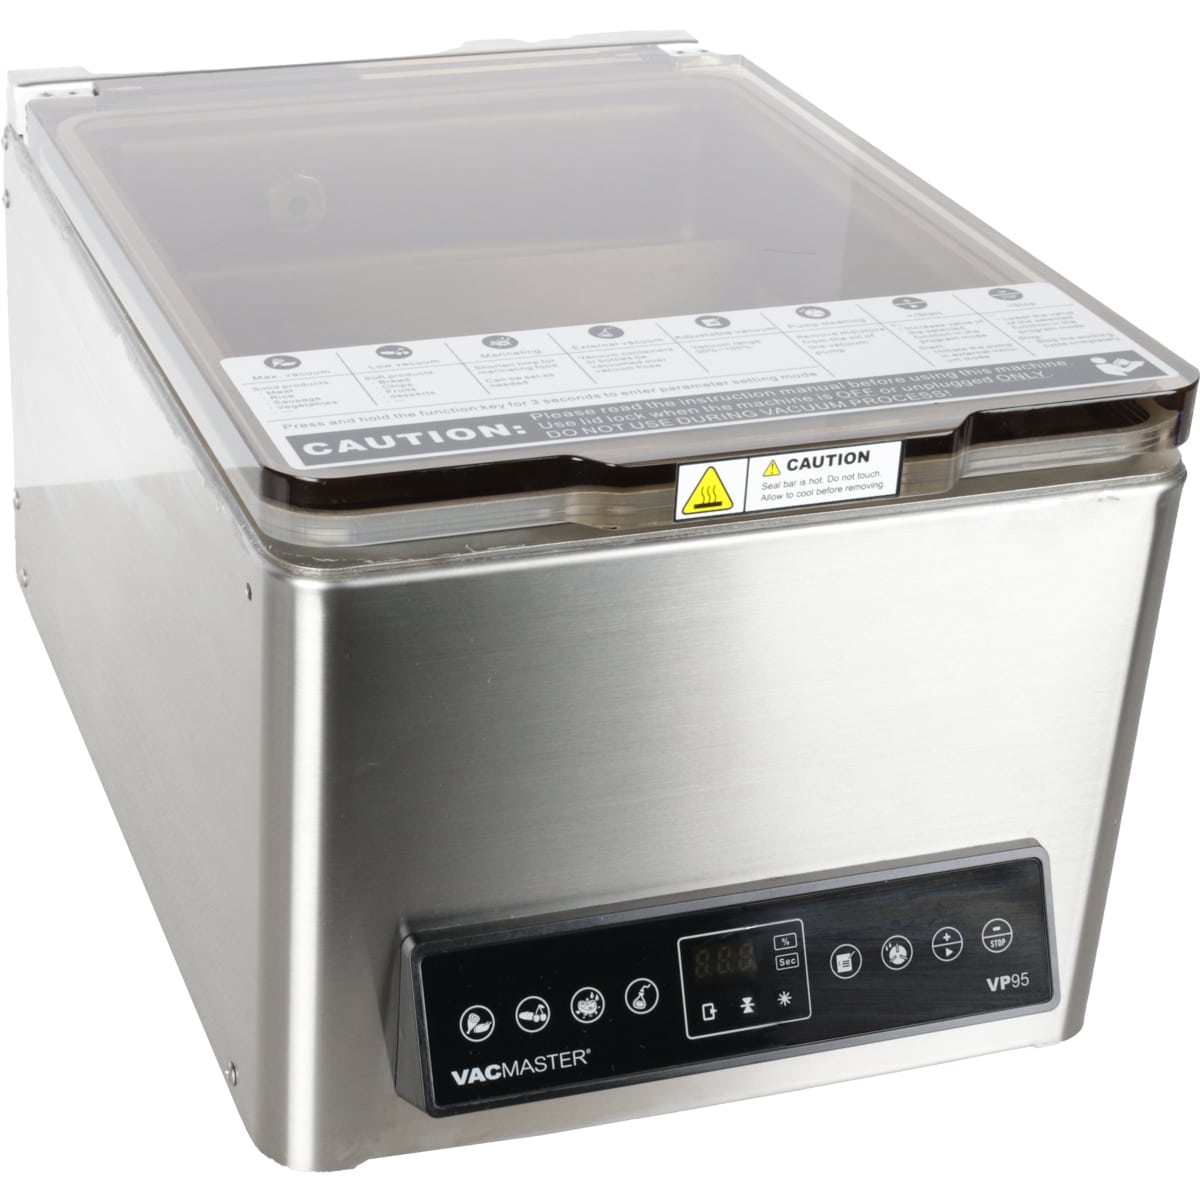 Vacmaster VP800 Commercial Double Chamber Vacuum Sealer with GAS Flush